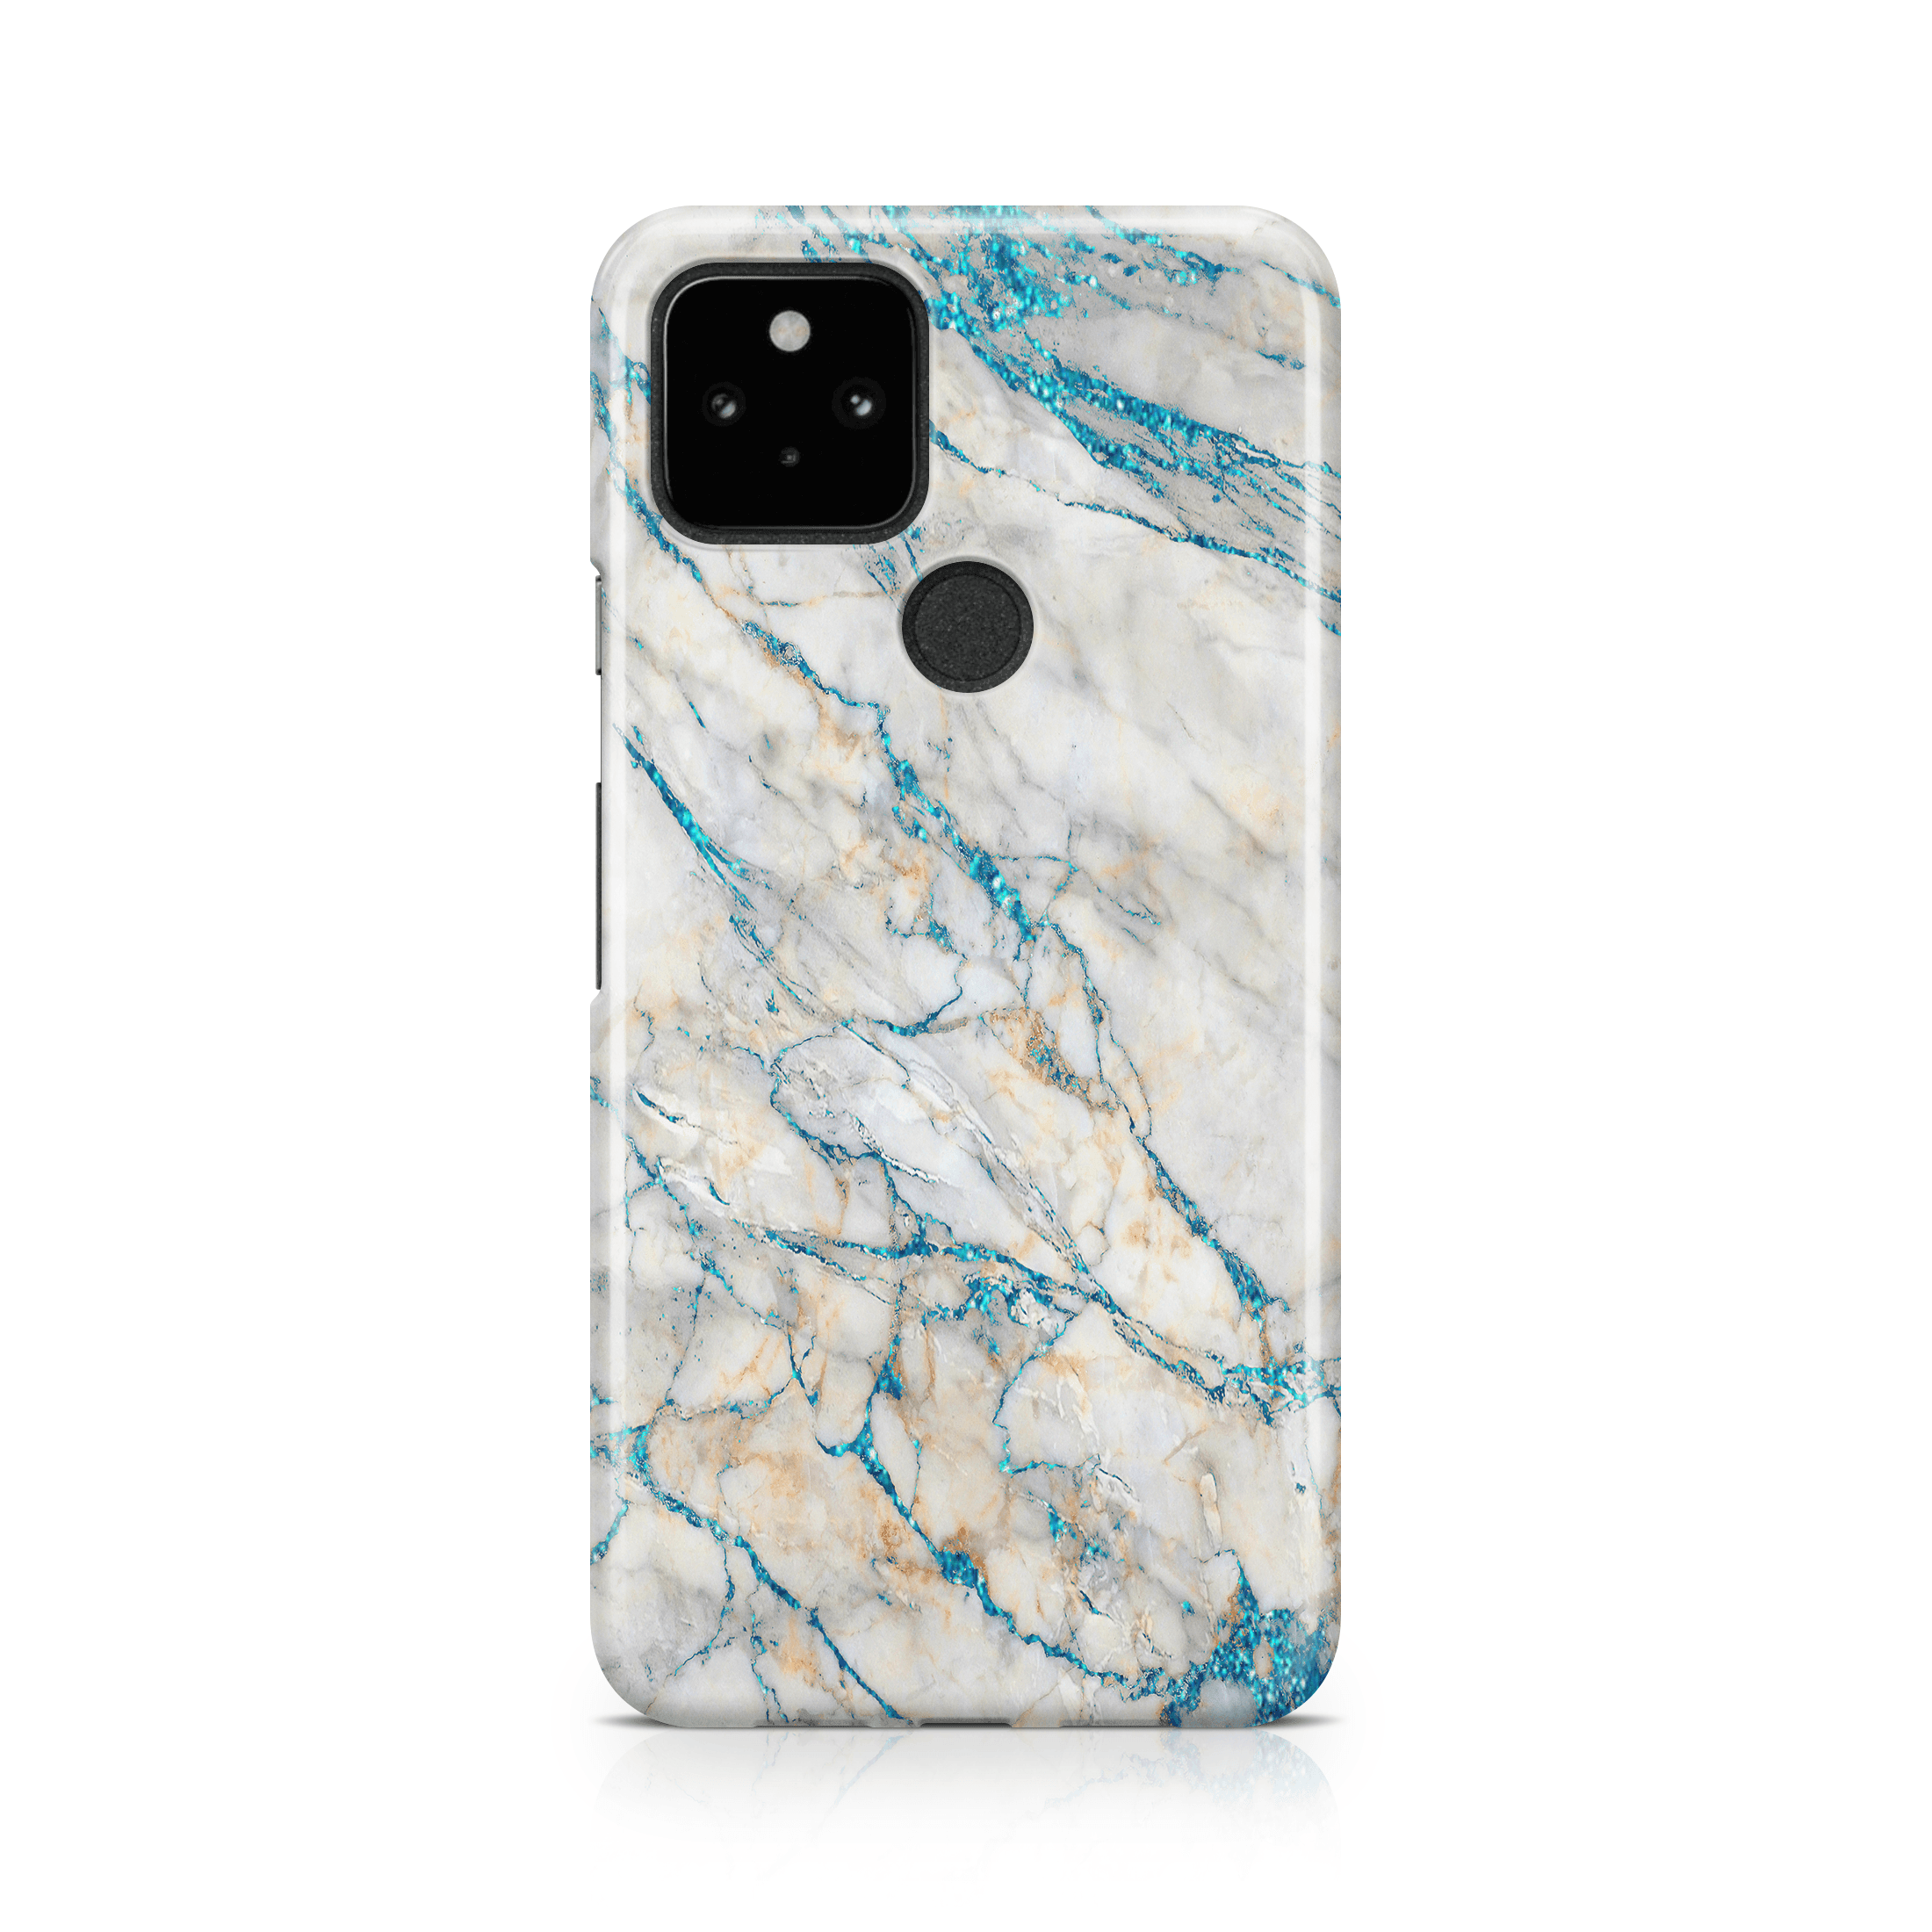 Blue White Marble - Google phone case designs by CaseSwagger